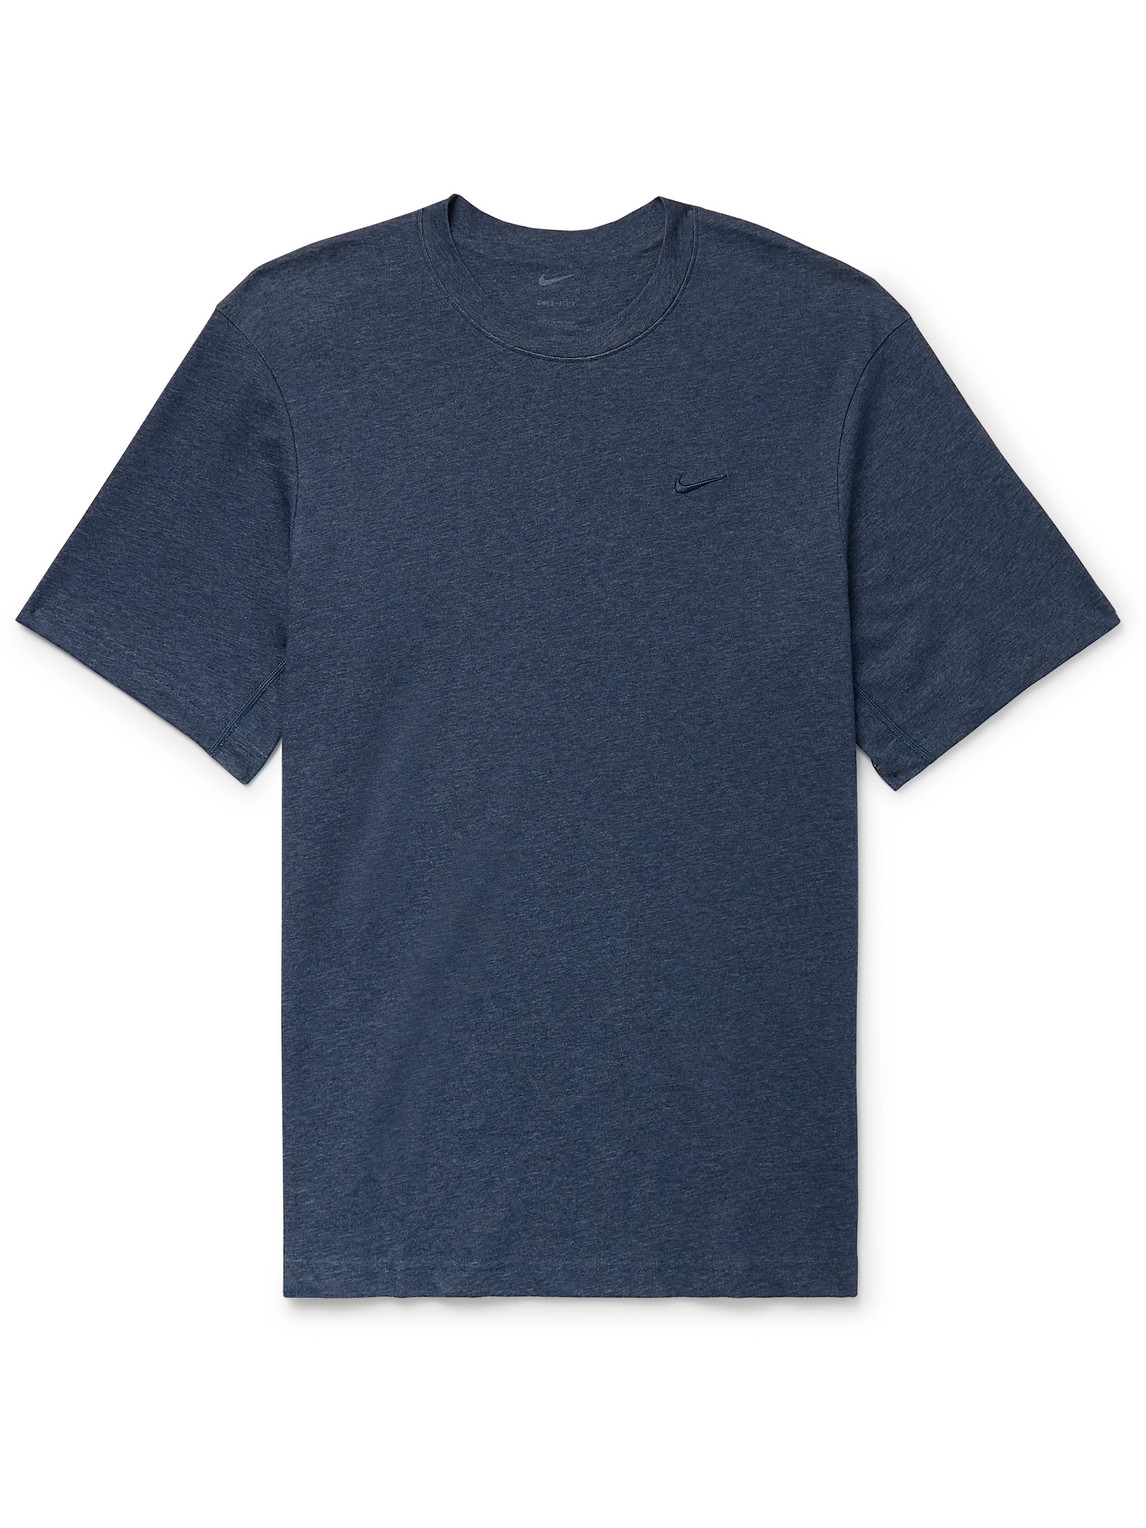 Primary Logo-Embroidered Cotton-Blend Dri-FIT T-Shirt